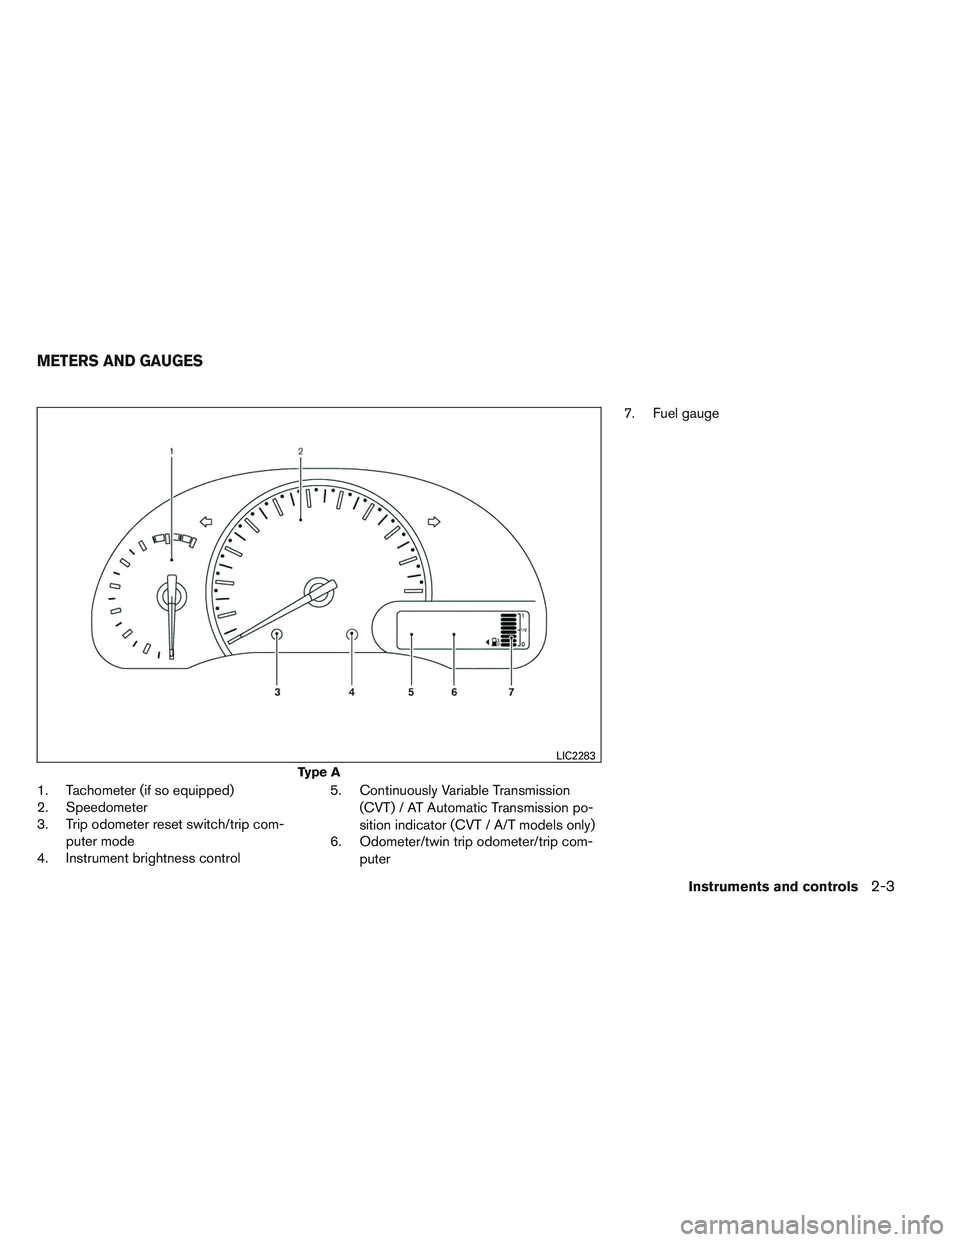 NISSAN VERSA 2013  Owners Manual 1. Tachometer (if so equipped)
2. Speedometer
3. Trip odometer reset switch/trip com-puter mode
4. Instrument brightness control 5. Continuously Variable Transmission
(CVT) / AT Automatic Transmission